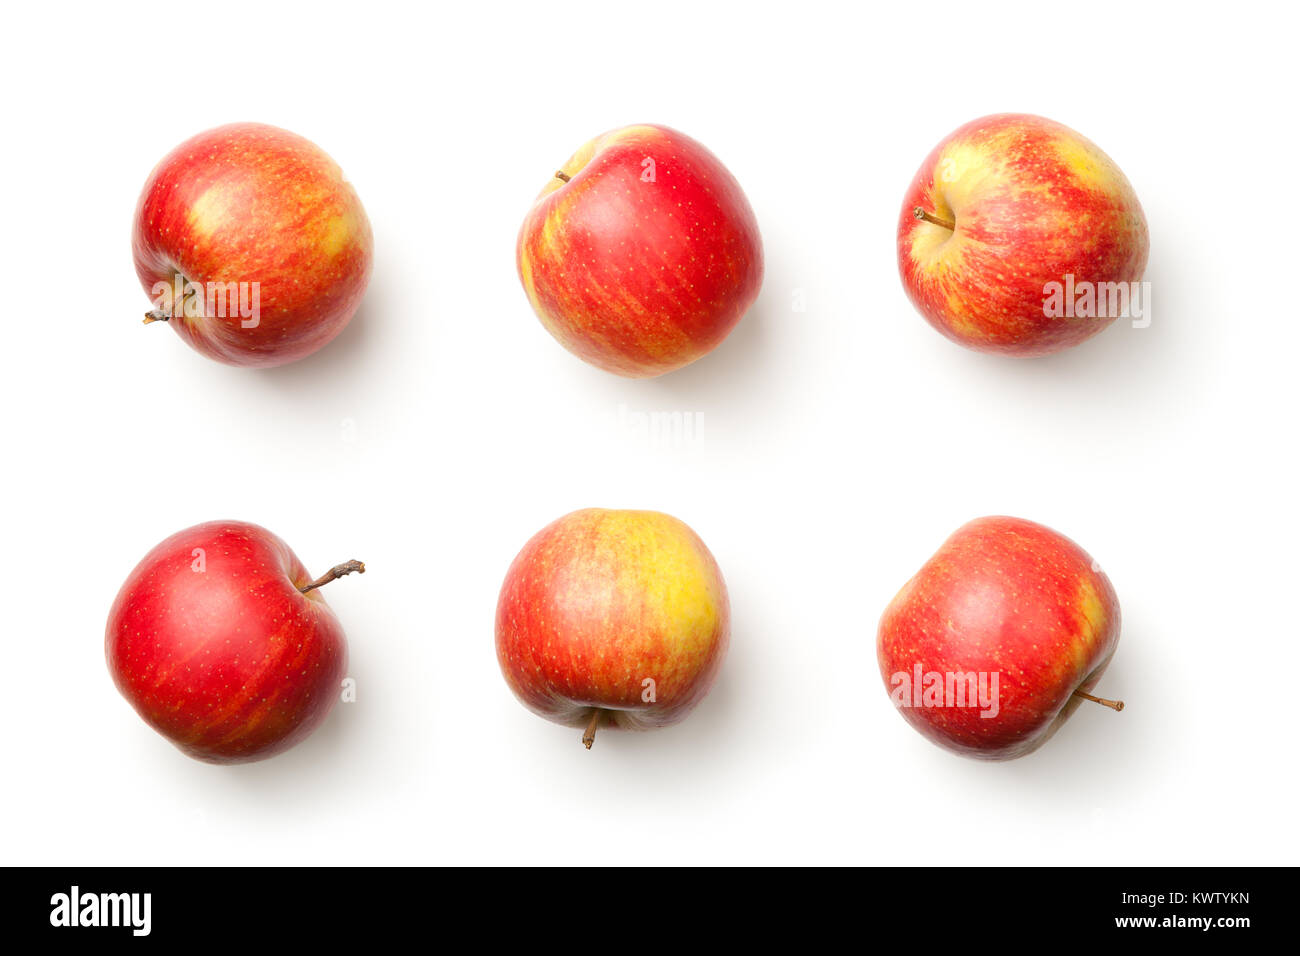 Apples isolated on white background. Champion apple. Top view Stock Photo